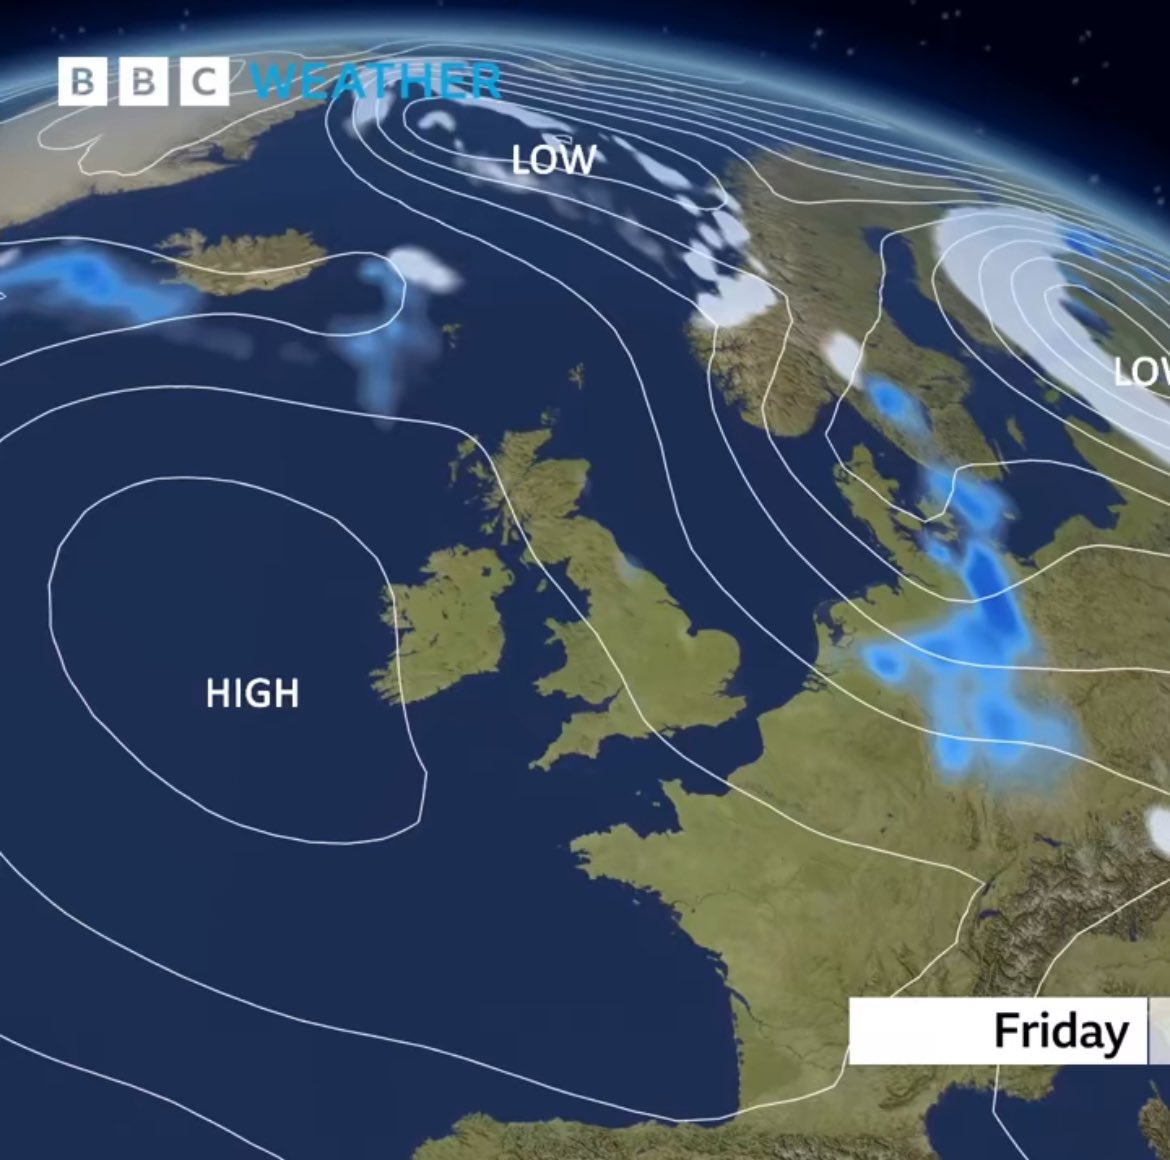 Back on @BBCBreakfast tomorrow. After months of wet weather, it’s looking increasingly likely that a drier spell is on its way with high pressure building…🌂. Stay tuned for the detail 👀